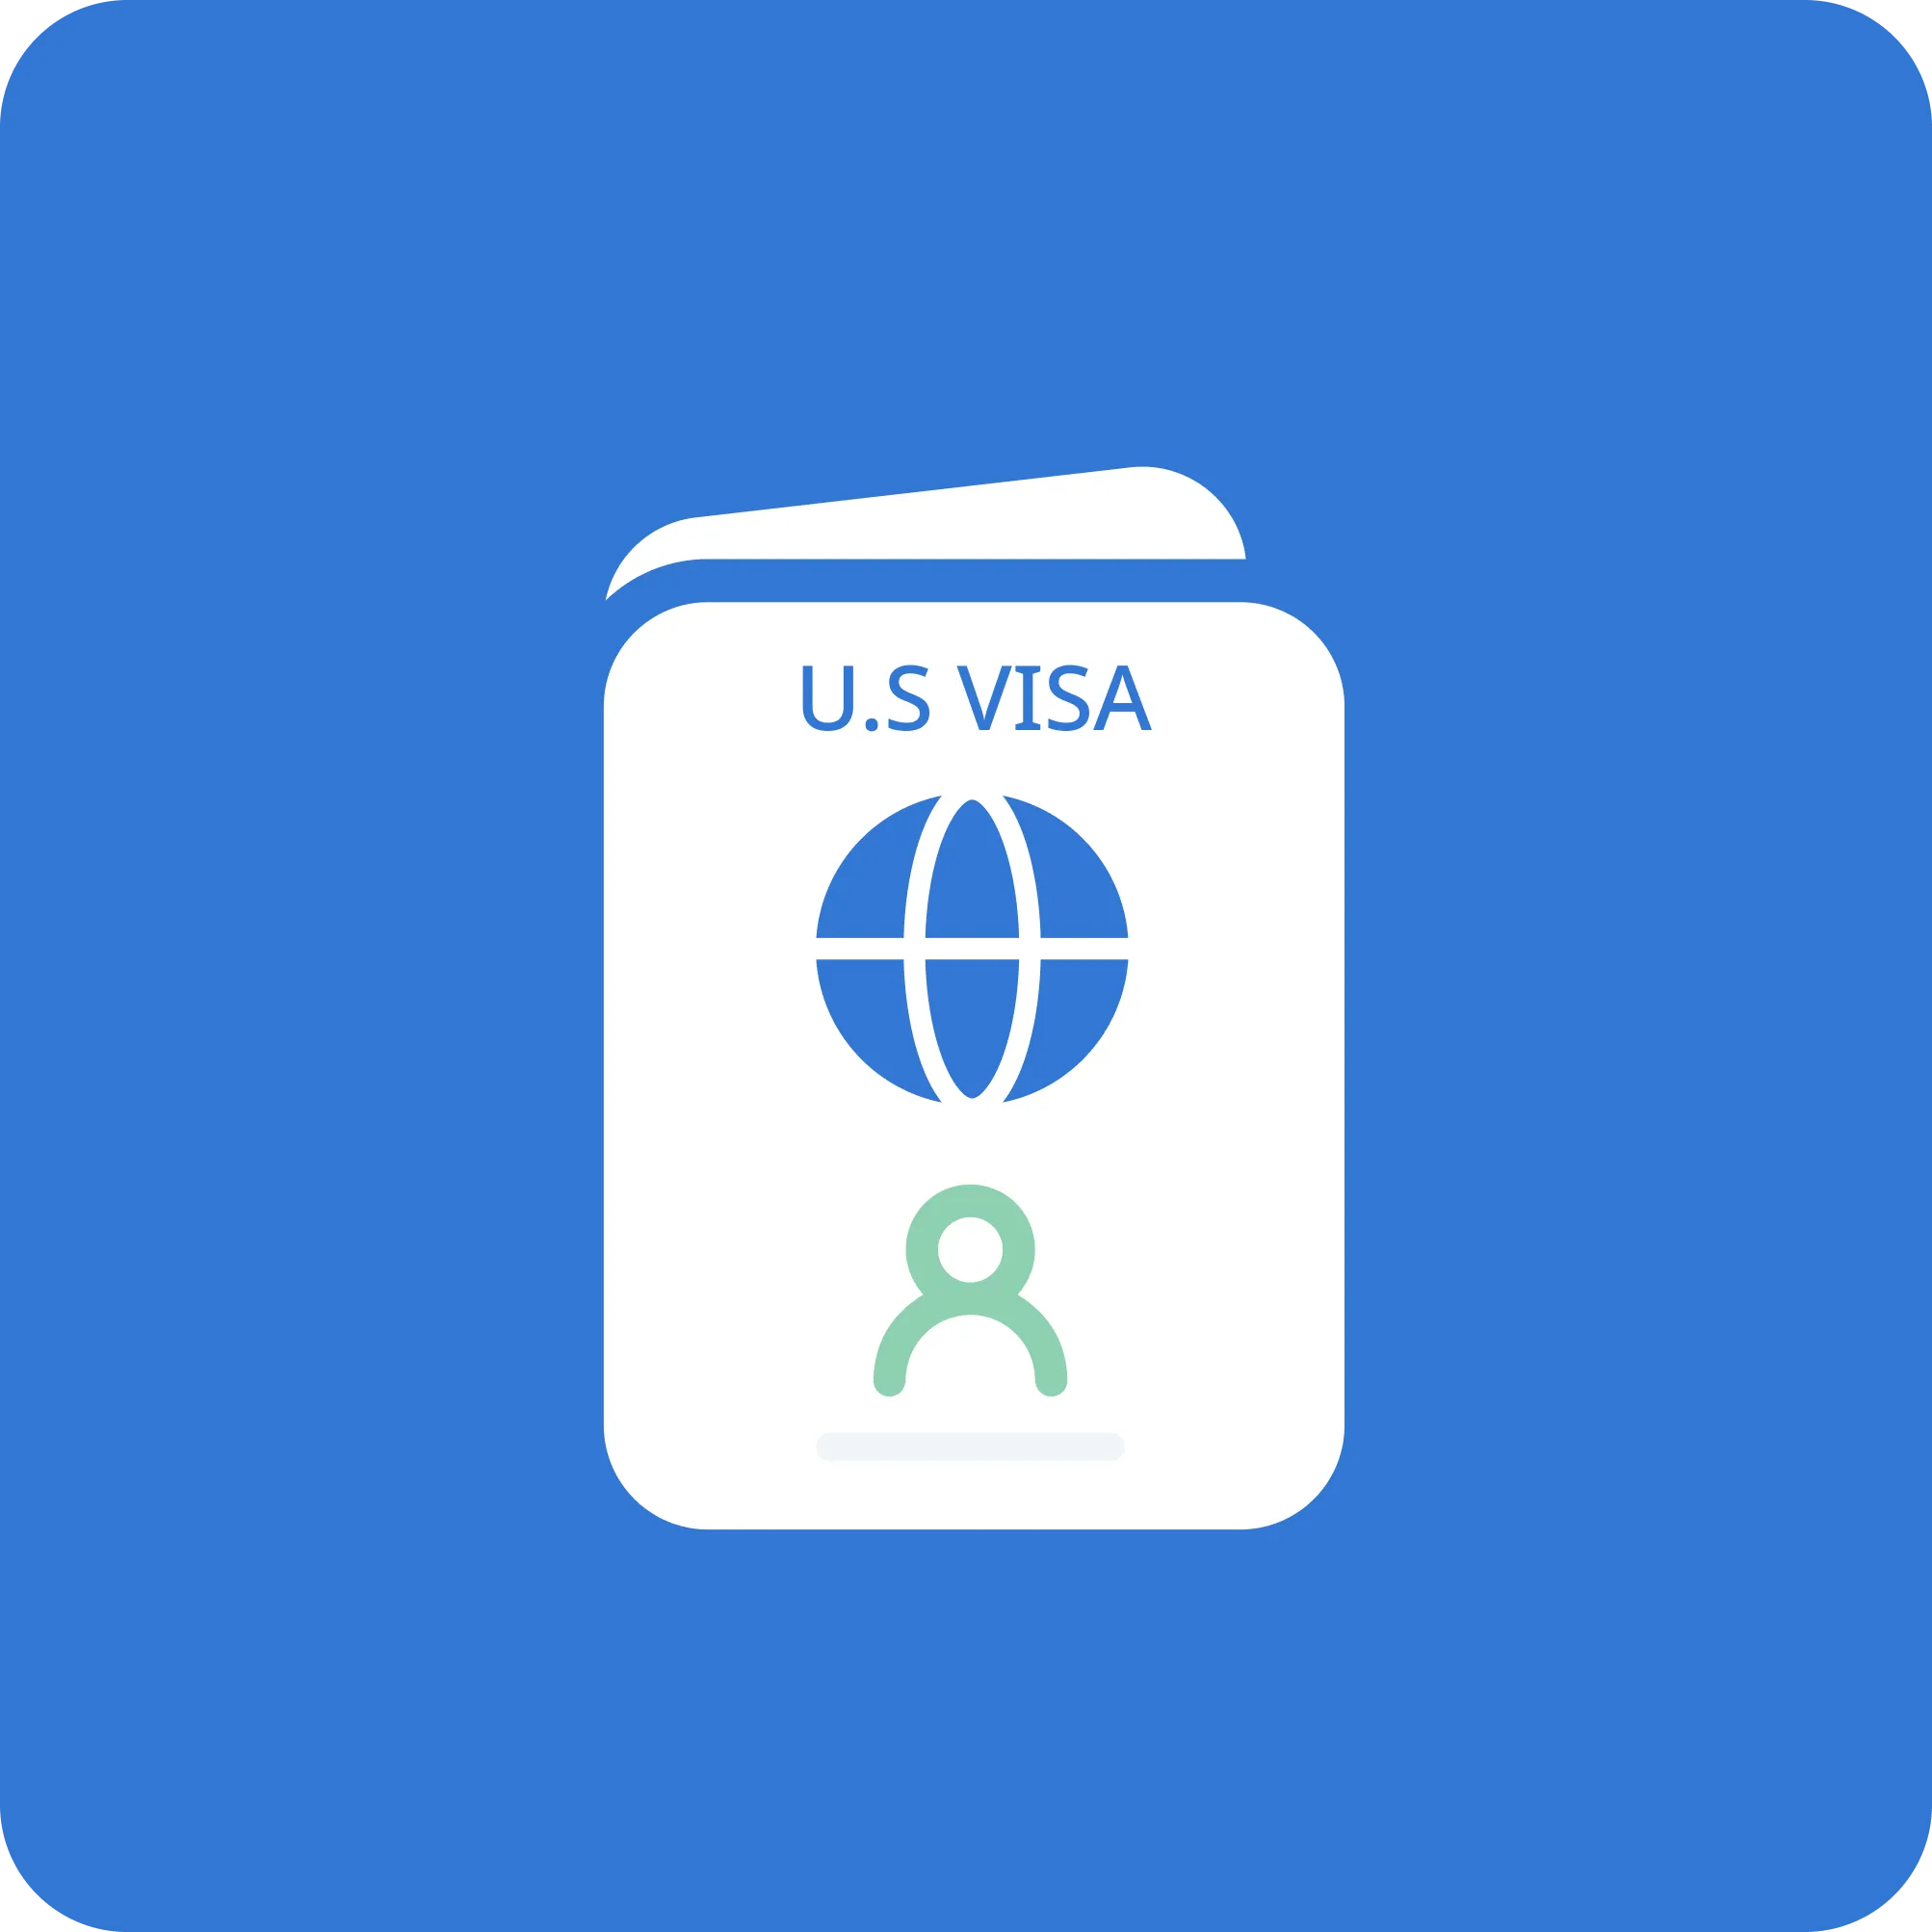 What is the process of getting US visa?